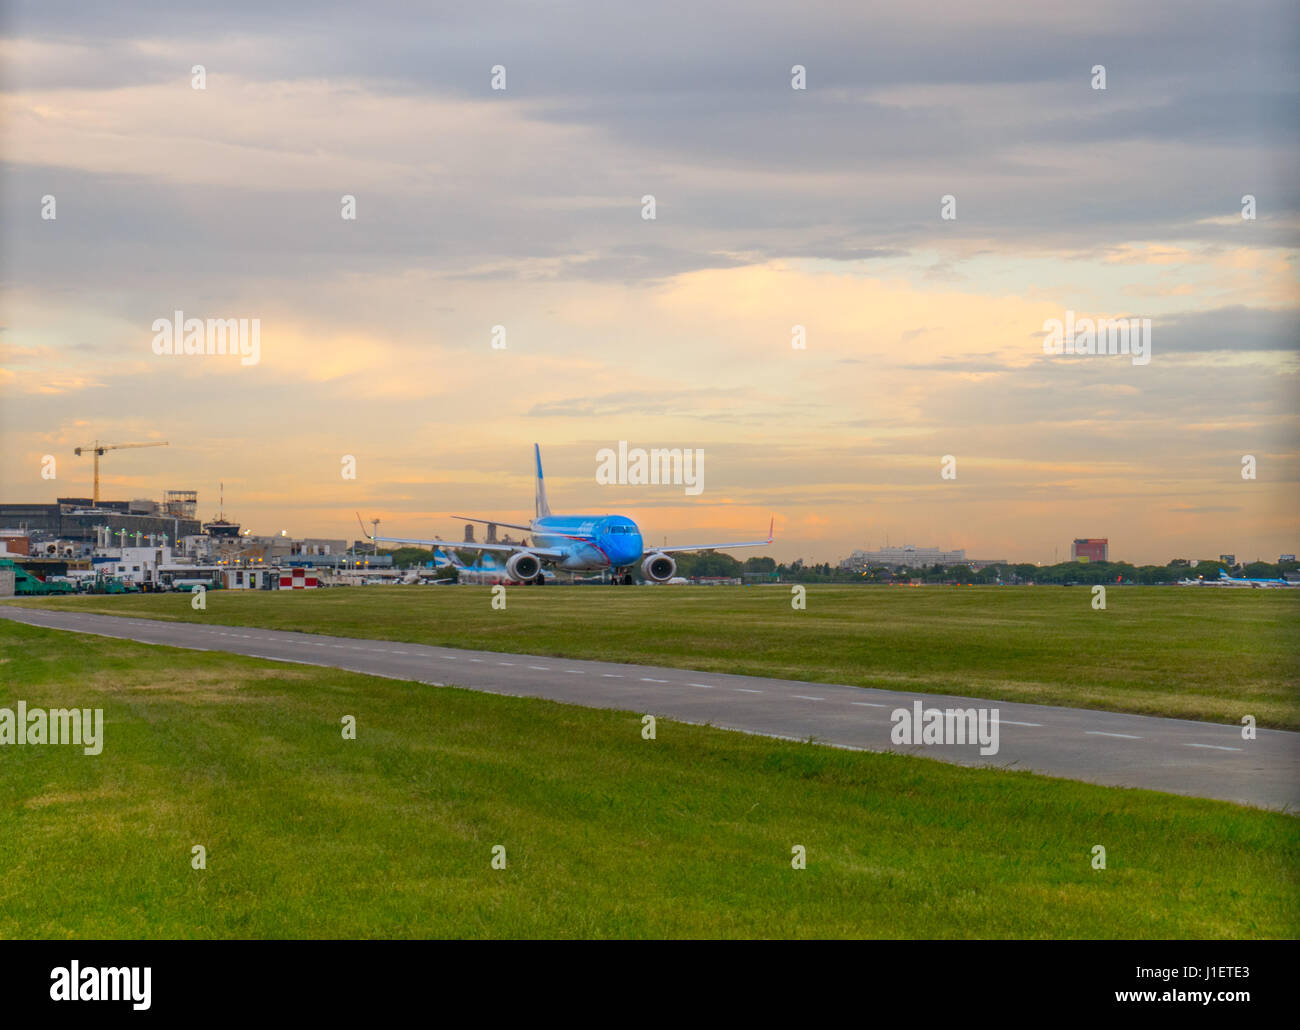 BUENOS AIRES, ARGENTINA - DECEMBER 14, 2016  Aerolineas Argentinas plane taxiing at Jorge Newbery Airport on December 16, 2016 in Buenos Aires, Argent Stock Photo